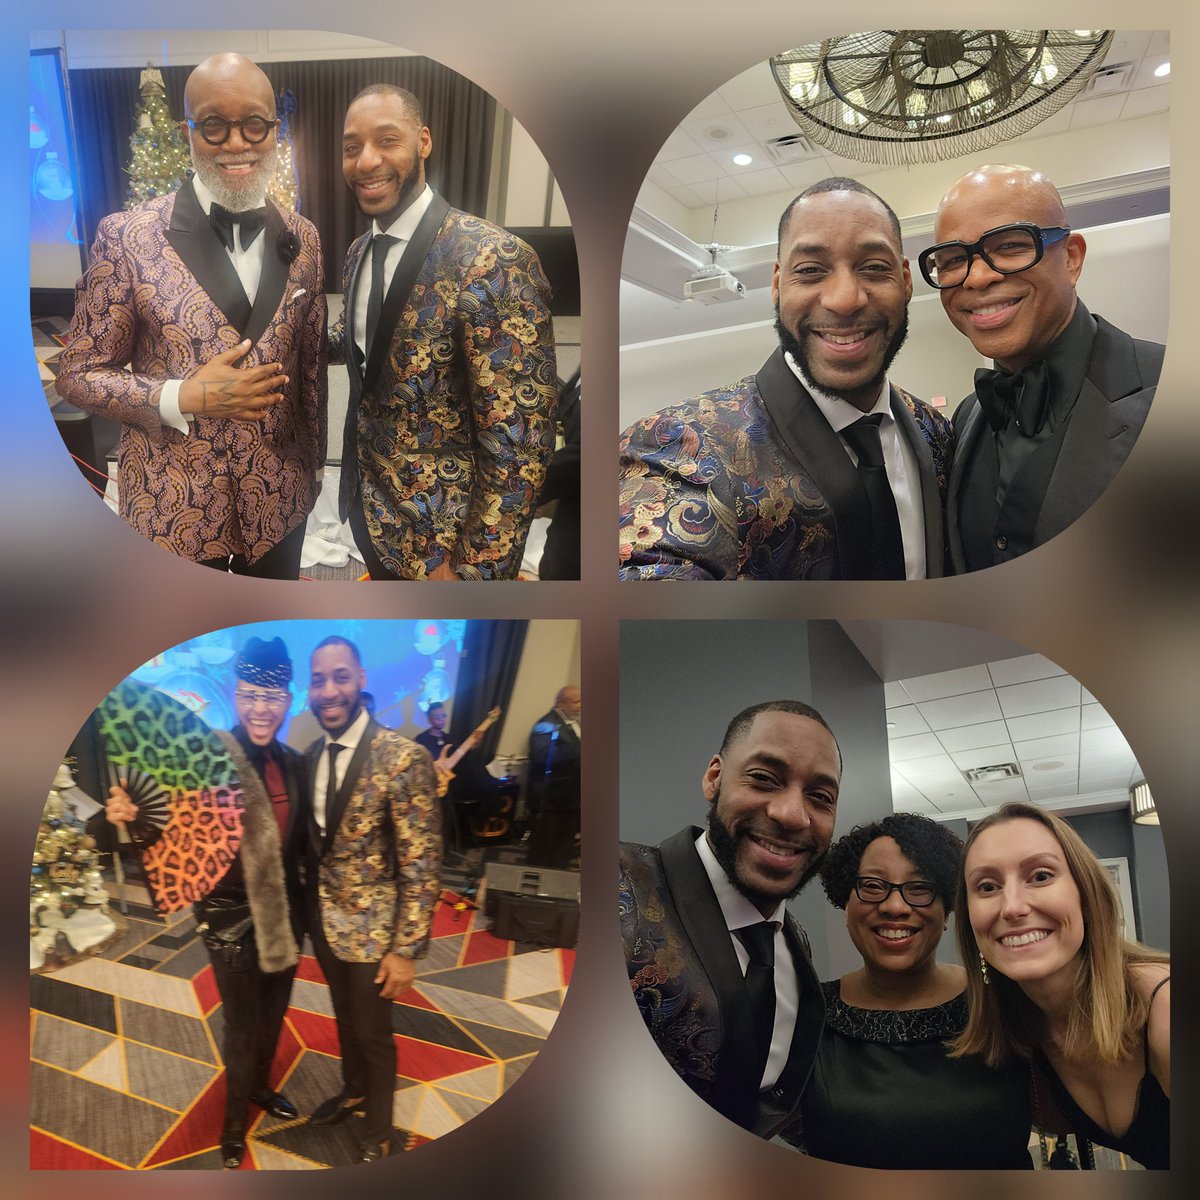 Thank you @lanisa70 for inviting me to be a part of your special night and joining your special community. I met some amazingly talented folks. Shout-outs to @chriswillistwit for wonderful voice and Rob Richardson for keeping the laughs flowing. #mohim #musician #comedian